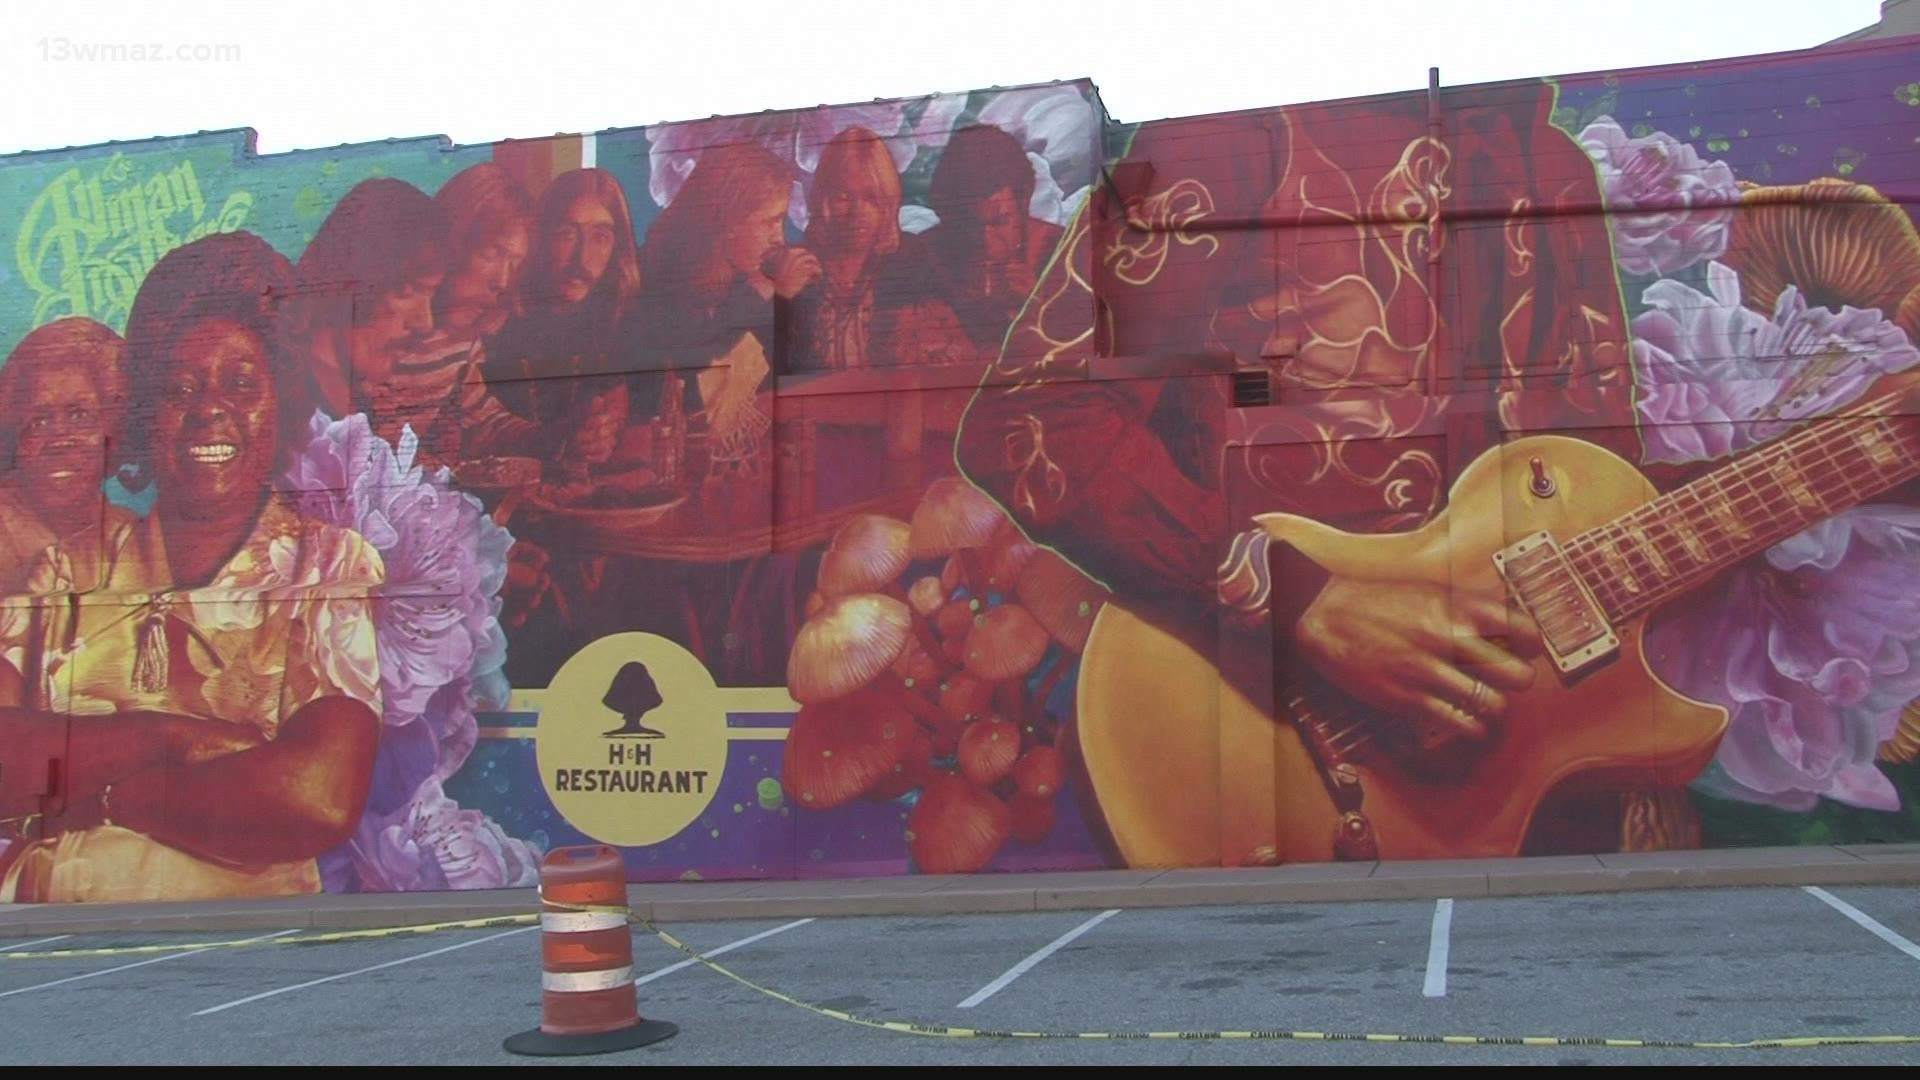 Macon's legendary H&H Restaurant unveiled their new mural in honor of "Mama Louise" Hudson and her late business partner Inez "Mama Hill" on Friday.